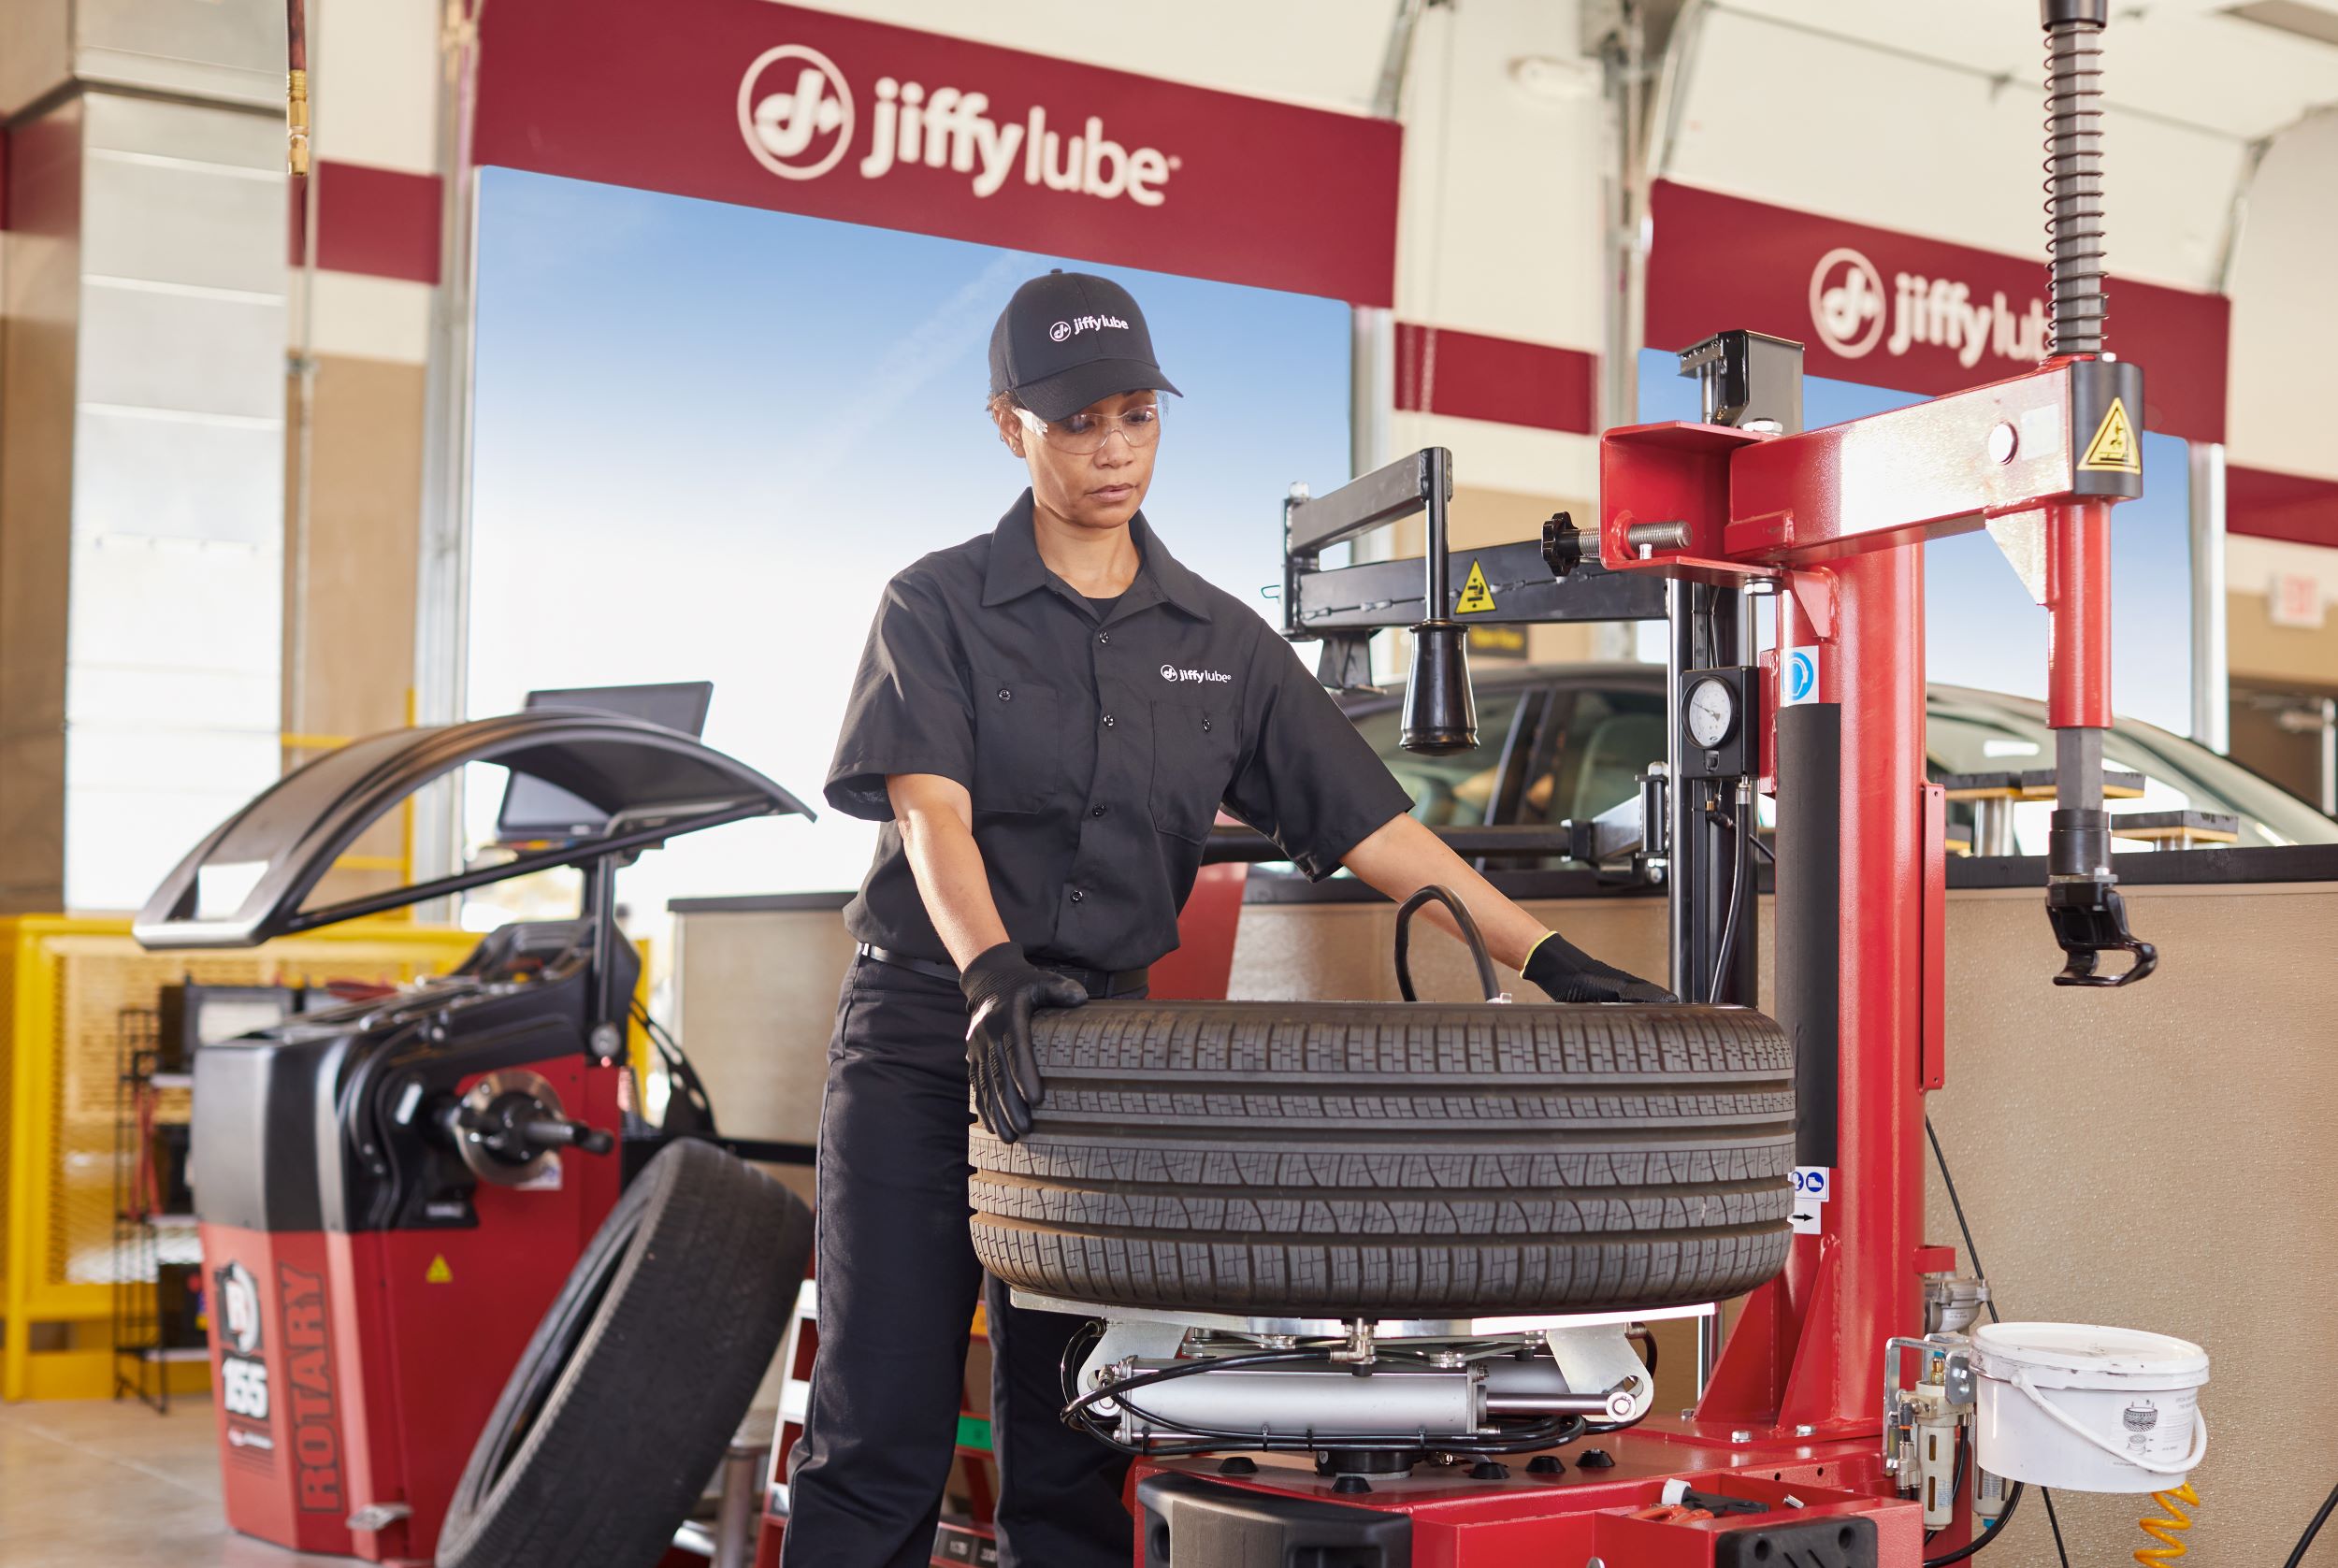 jiffy lube employee performing a tire inspection